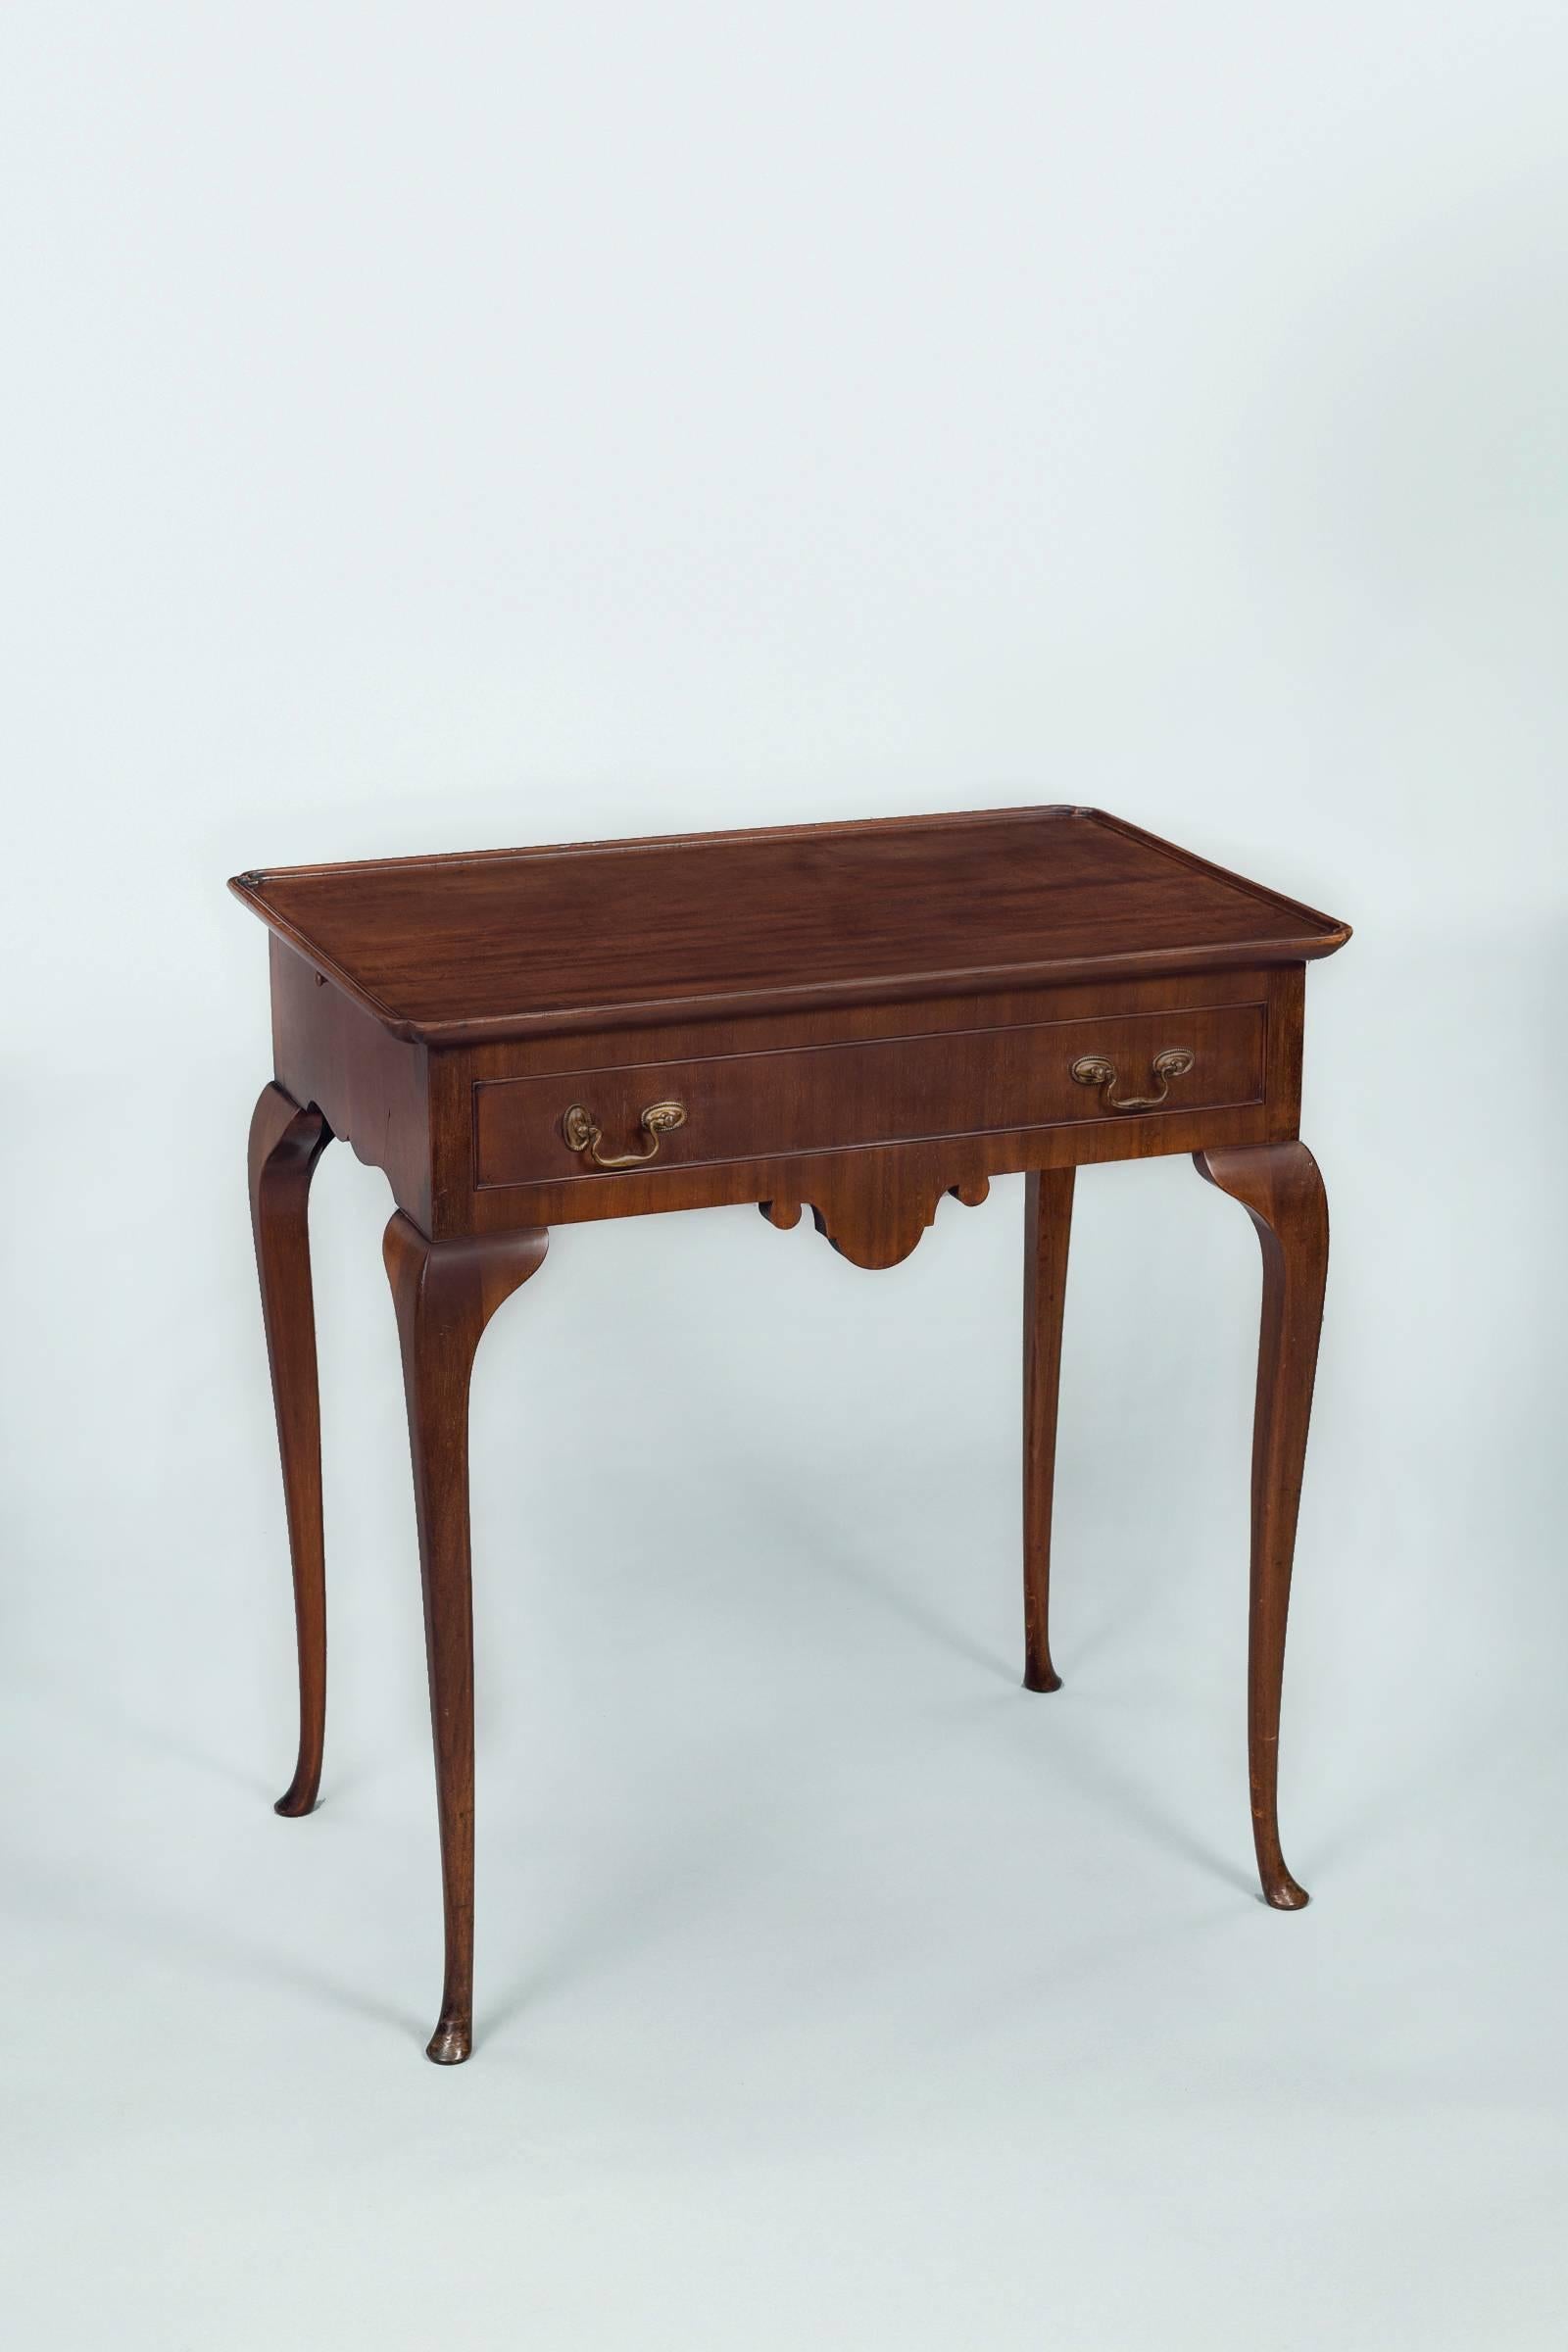 Elegant Dutch mahogany tea table with molded tray-top, notched corners, shaped frieze on all four sides, pull-out candle slides, brass swan neck handle hardware, raised on cabriole legs.